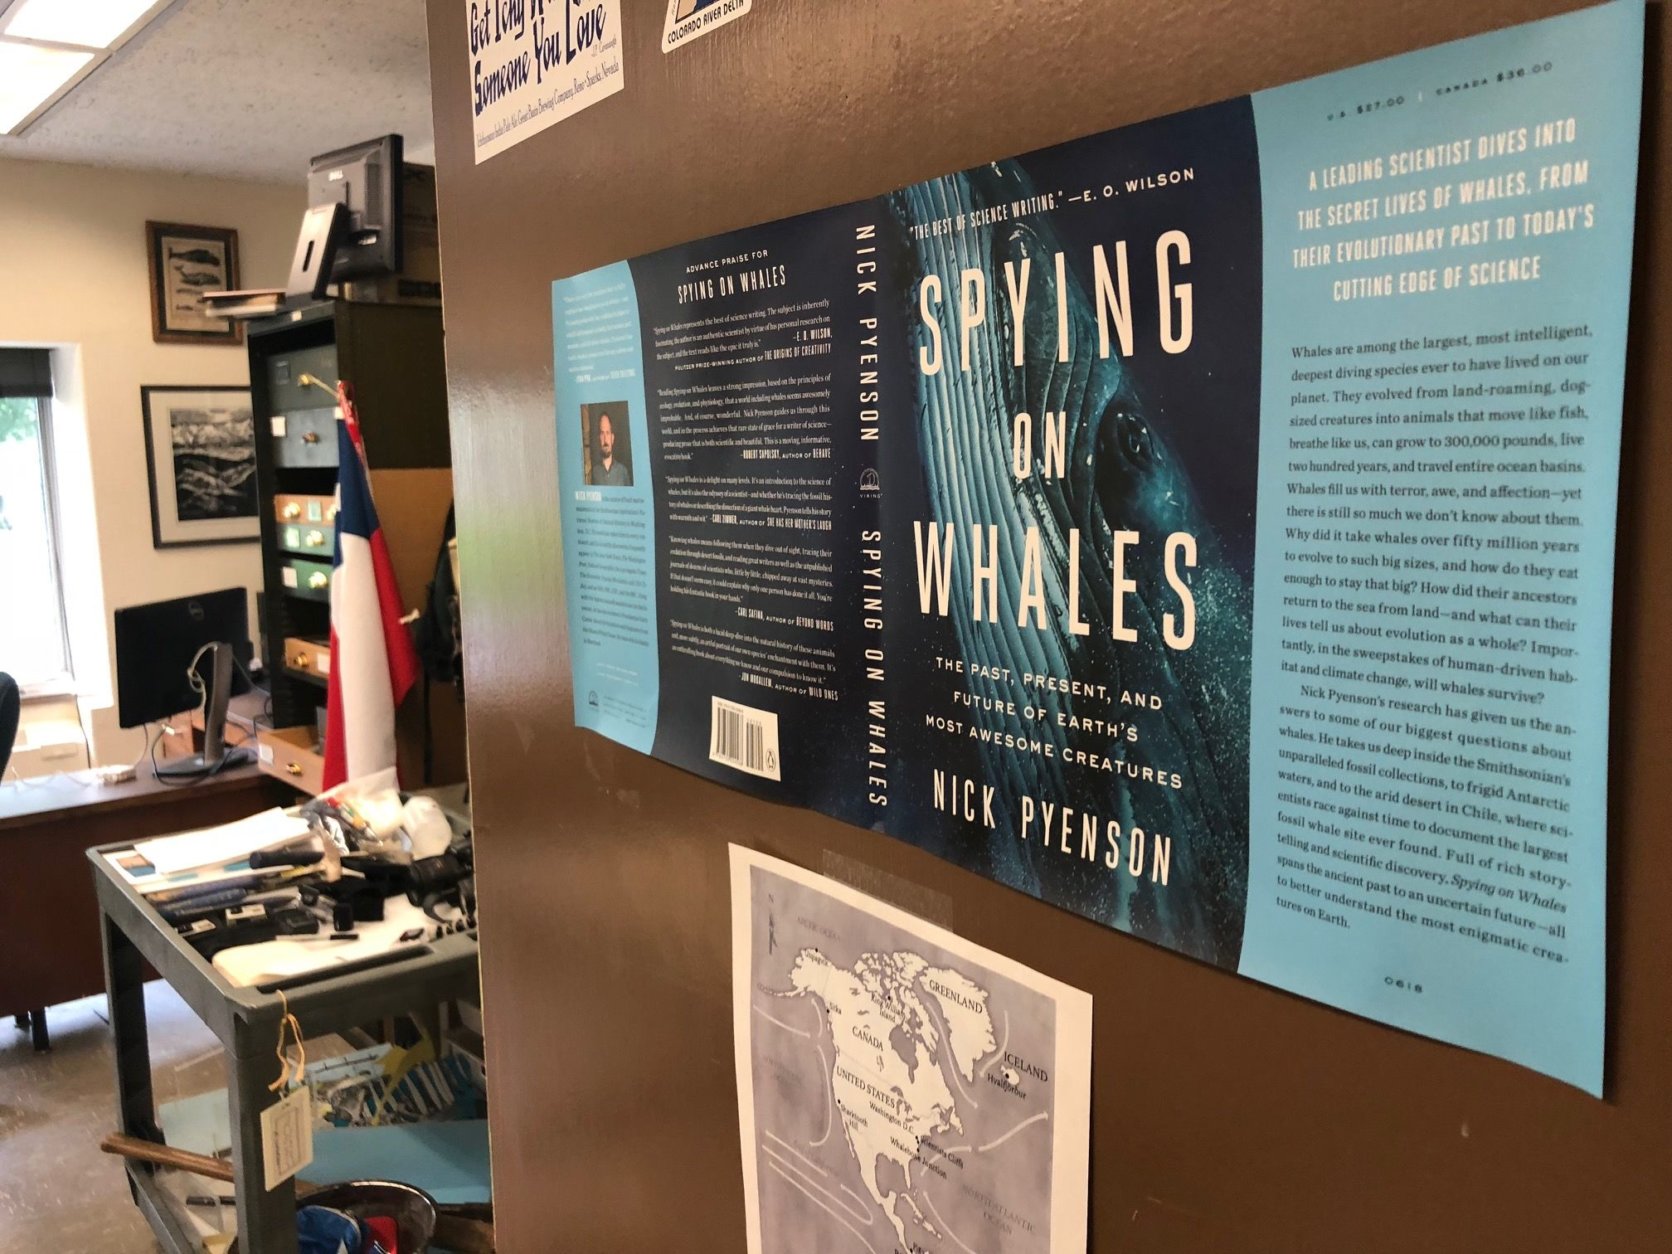 Pyenson authored "Spying on Whales: The Past, Present, and Future of the Earth's Most Awesome Creatures." It tells the scientific story behind their evolution, their extreme biology and their complicated relationships with humans. (WTOP/Megan Cloherty)